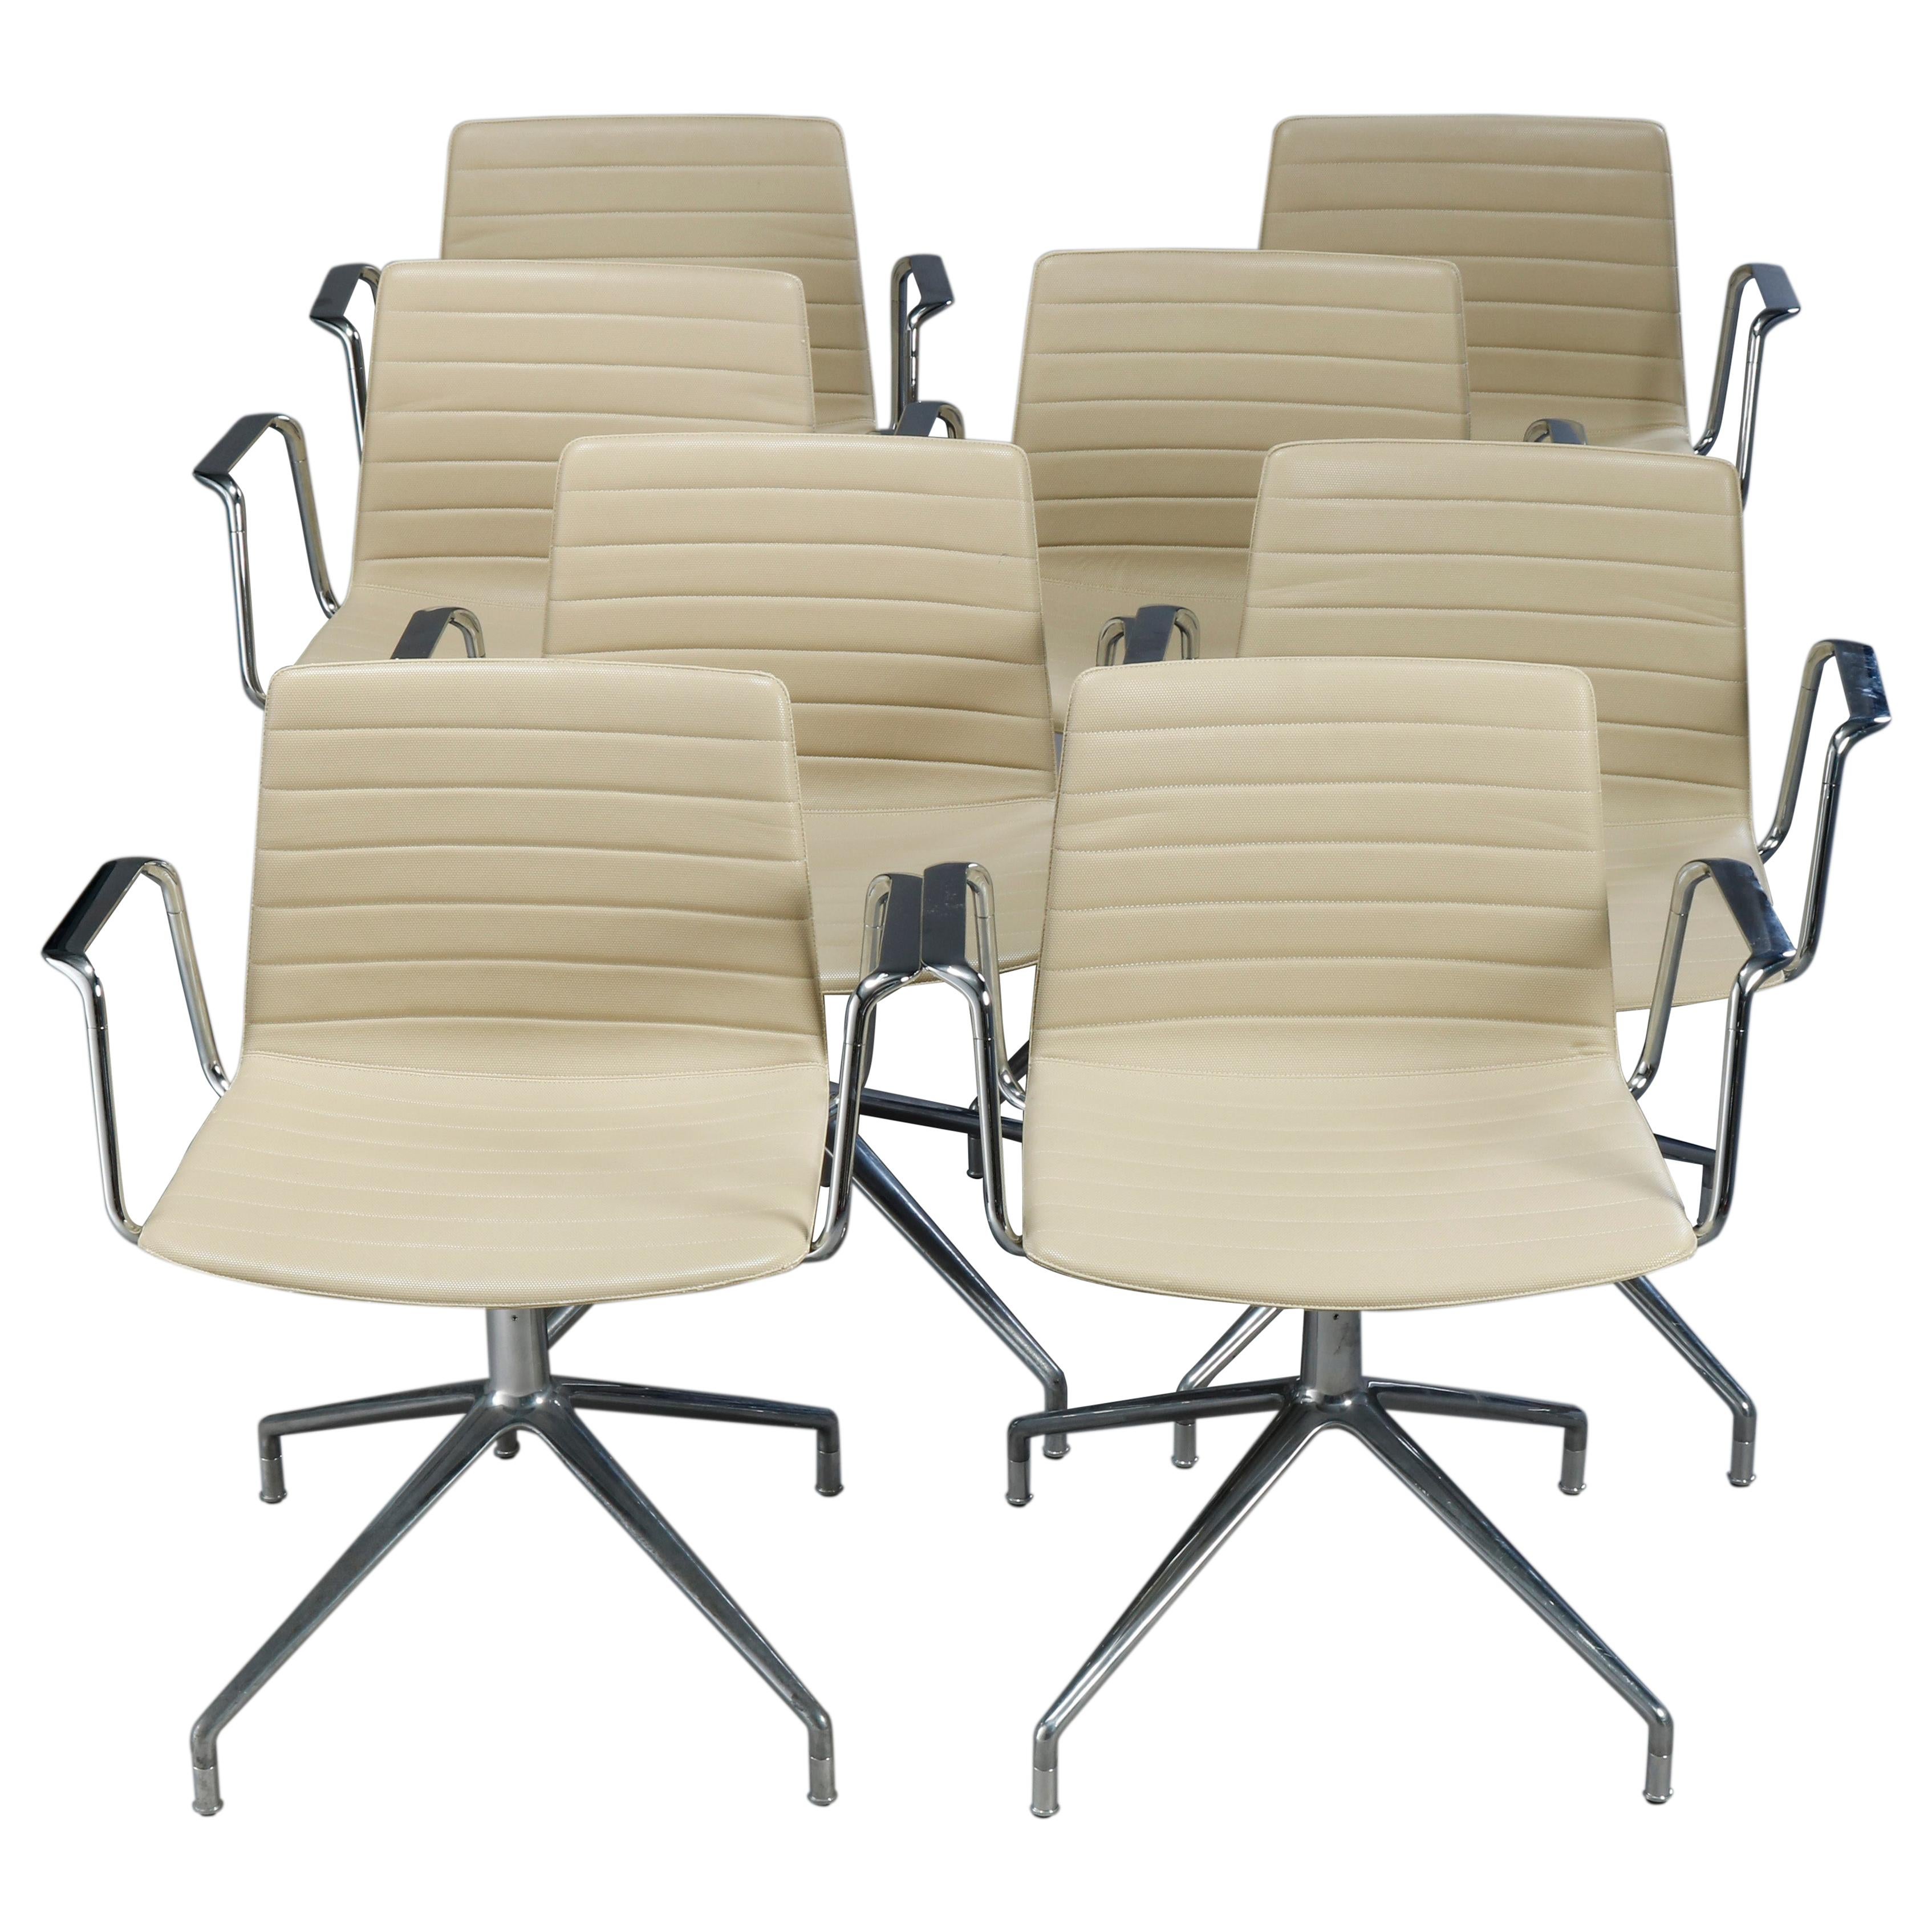 8 Mid-Century Modern Eames for Miller School Chrome Swivel Chairs by Cazzaniga